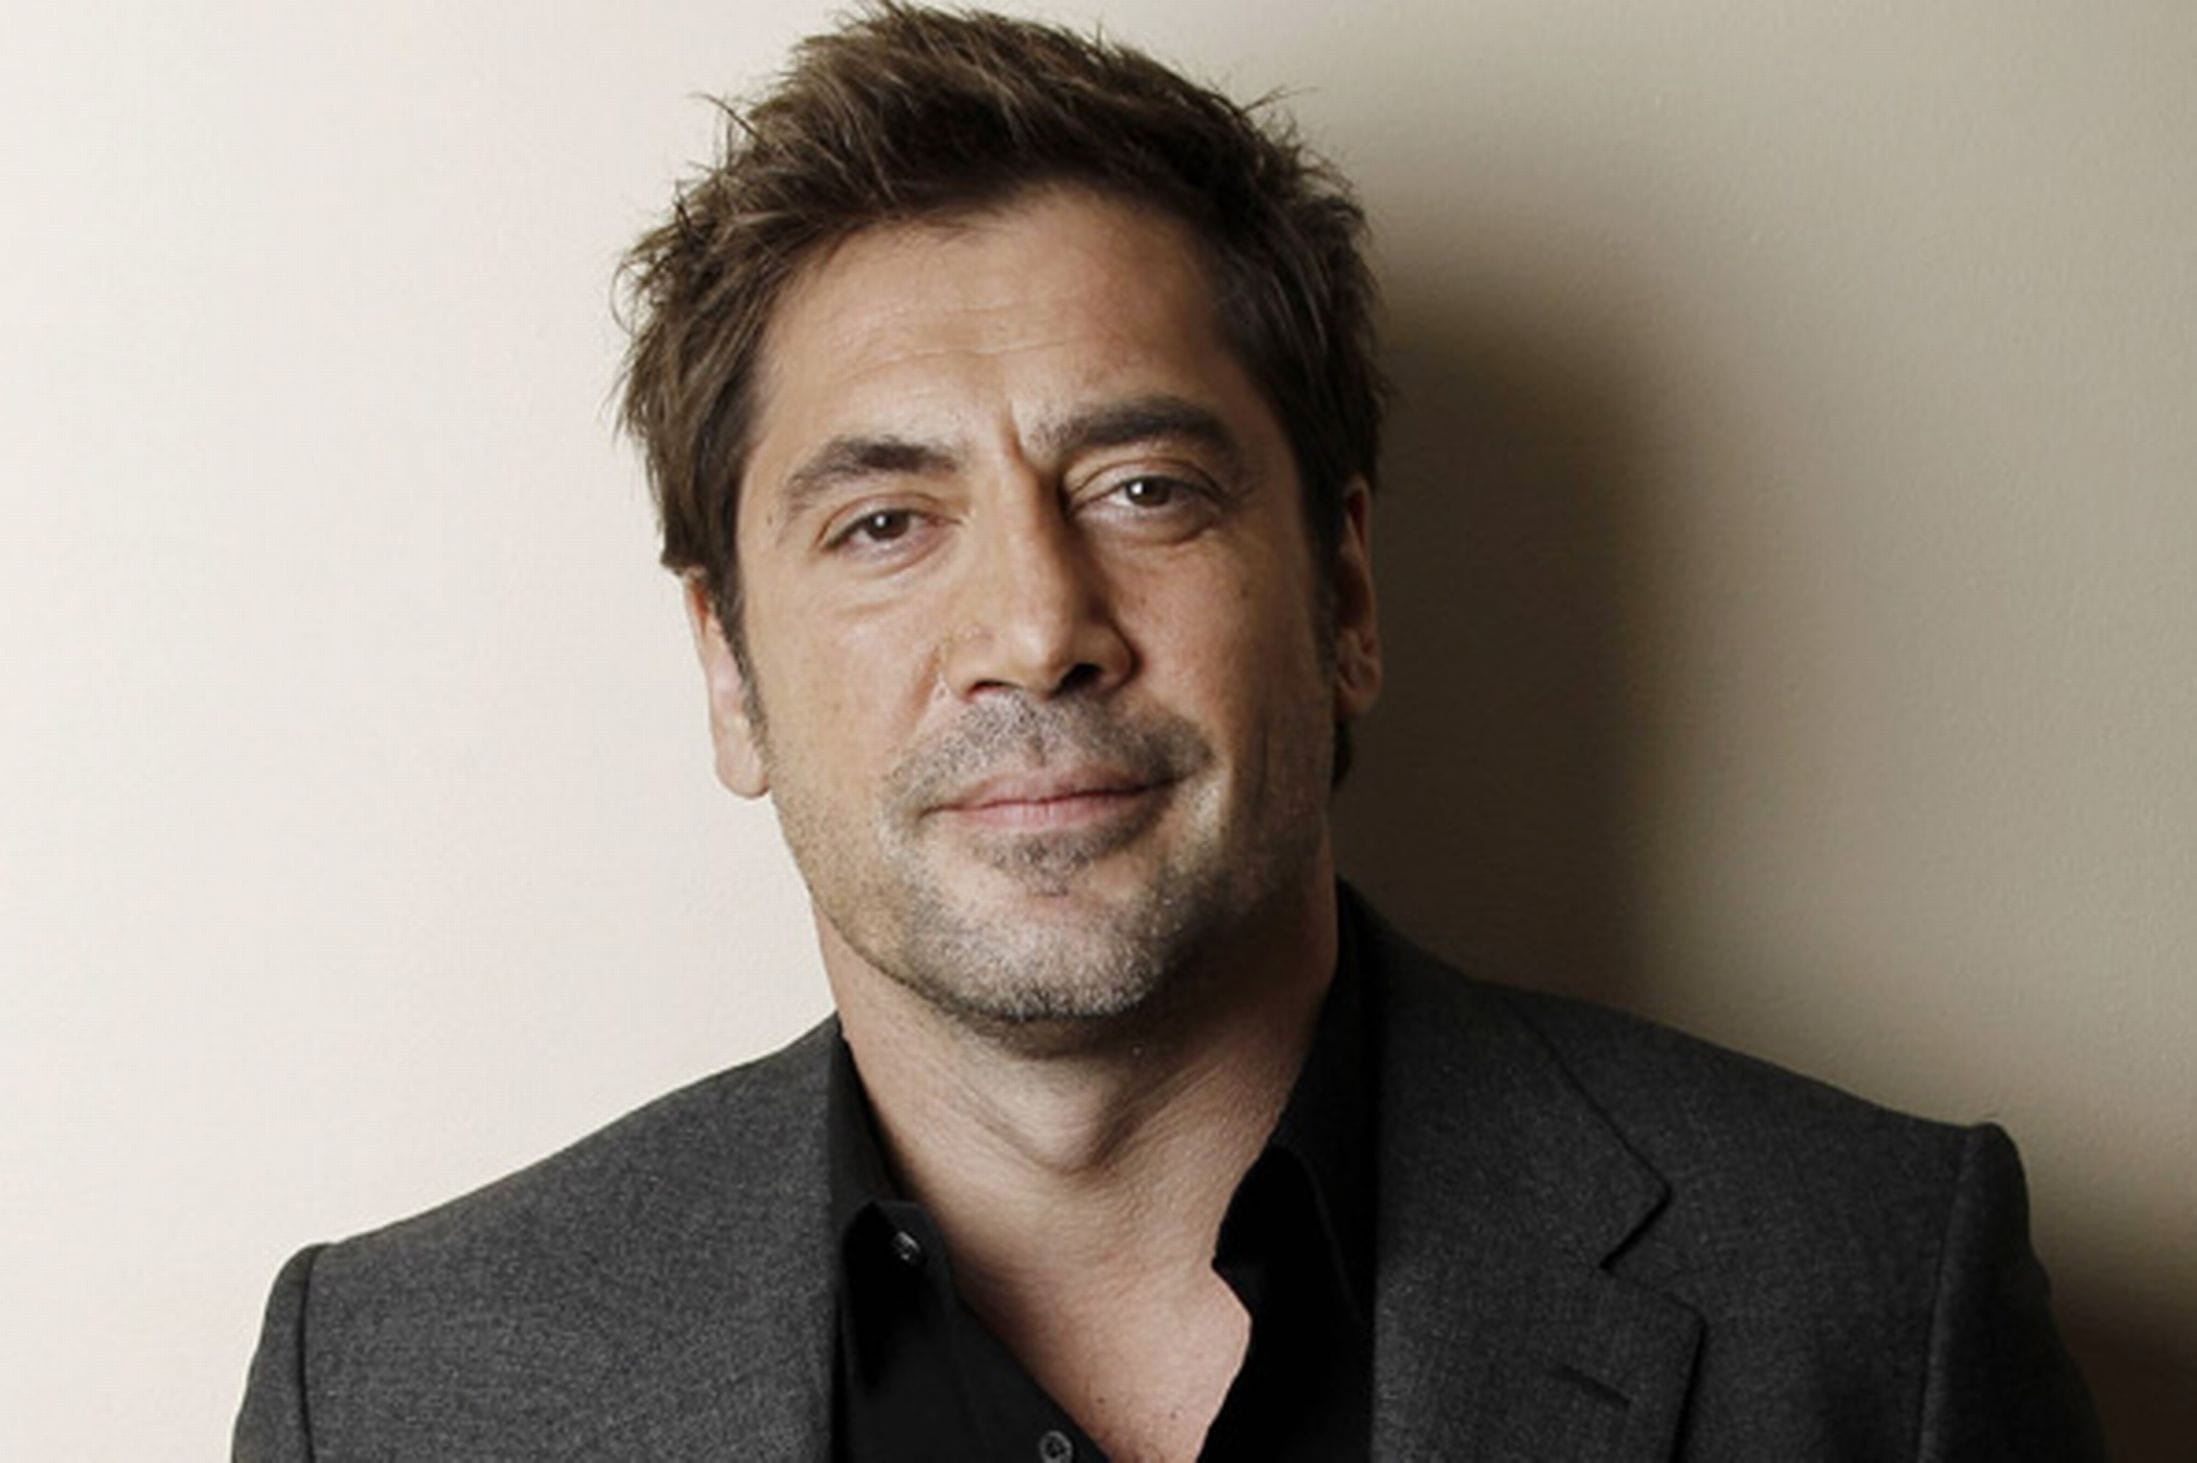 Javier Bardem movies, Top free backgrounds, Spanish actor, Hollywood, 2200x1470 HD Desktop